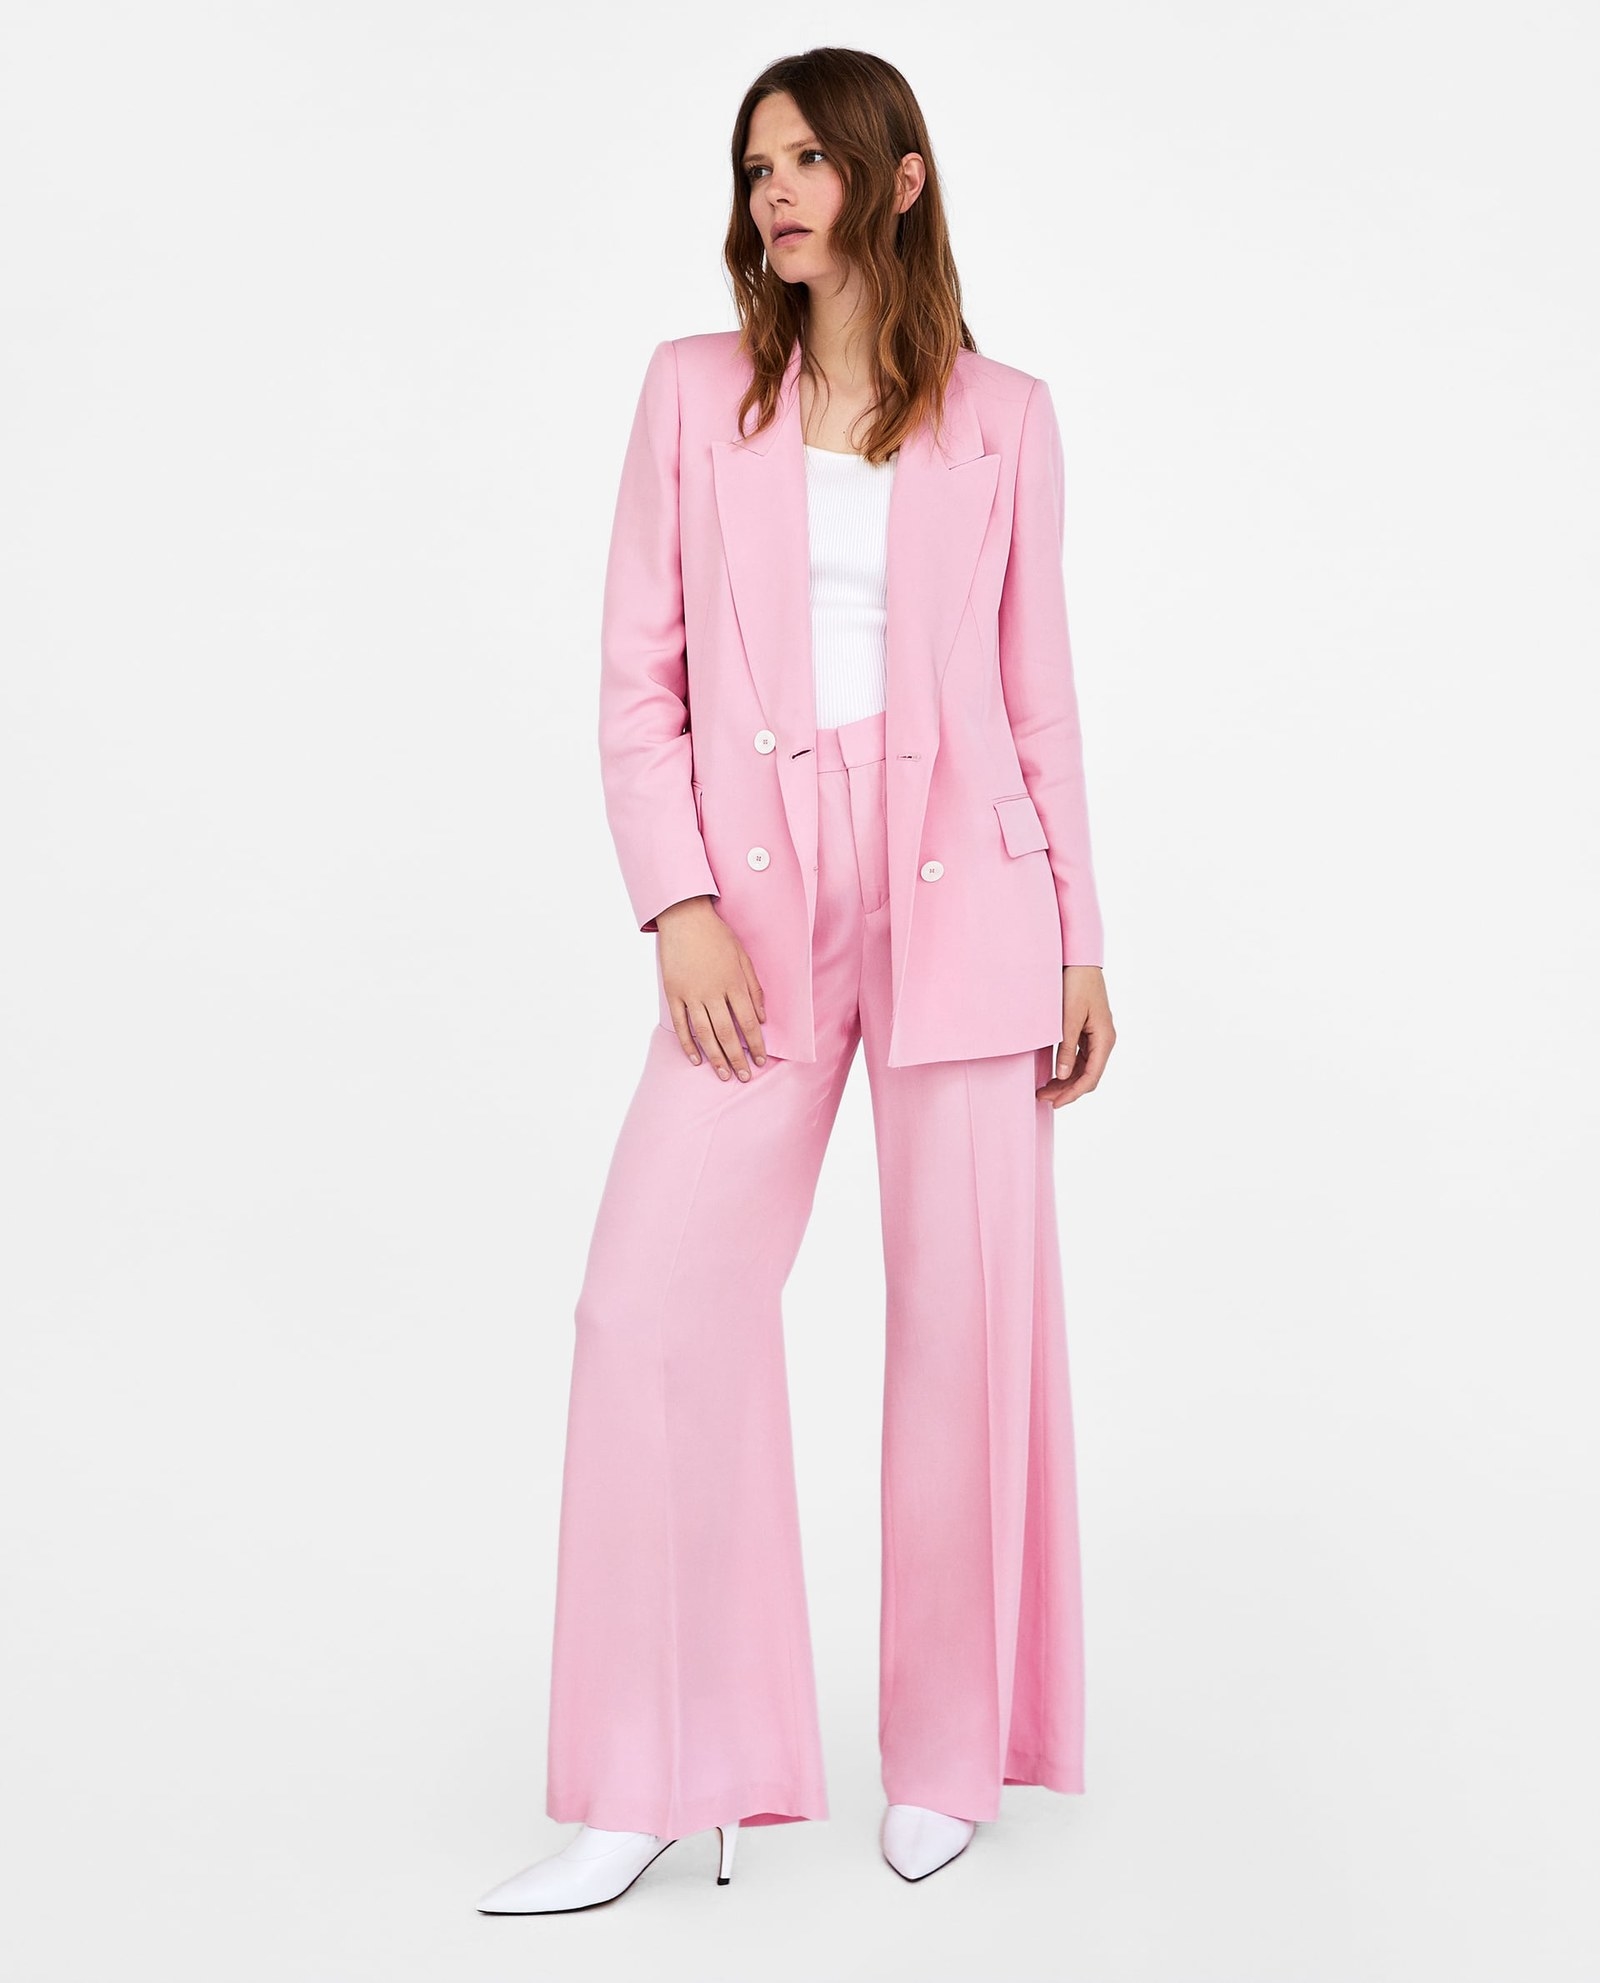 Zara Is Having A Sale And Here Are Some Of The Things You're Definitely ...